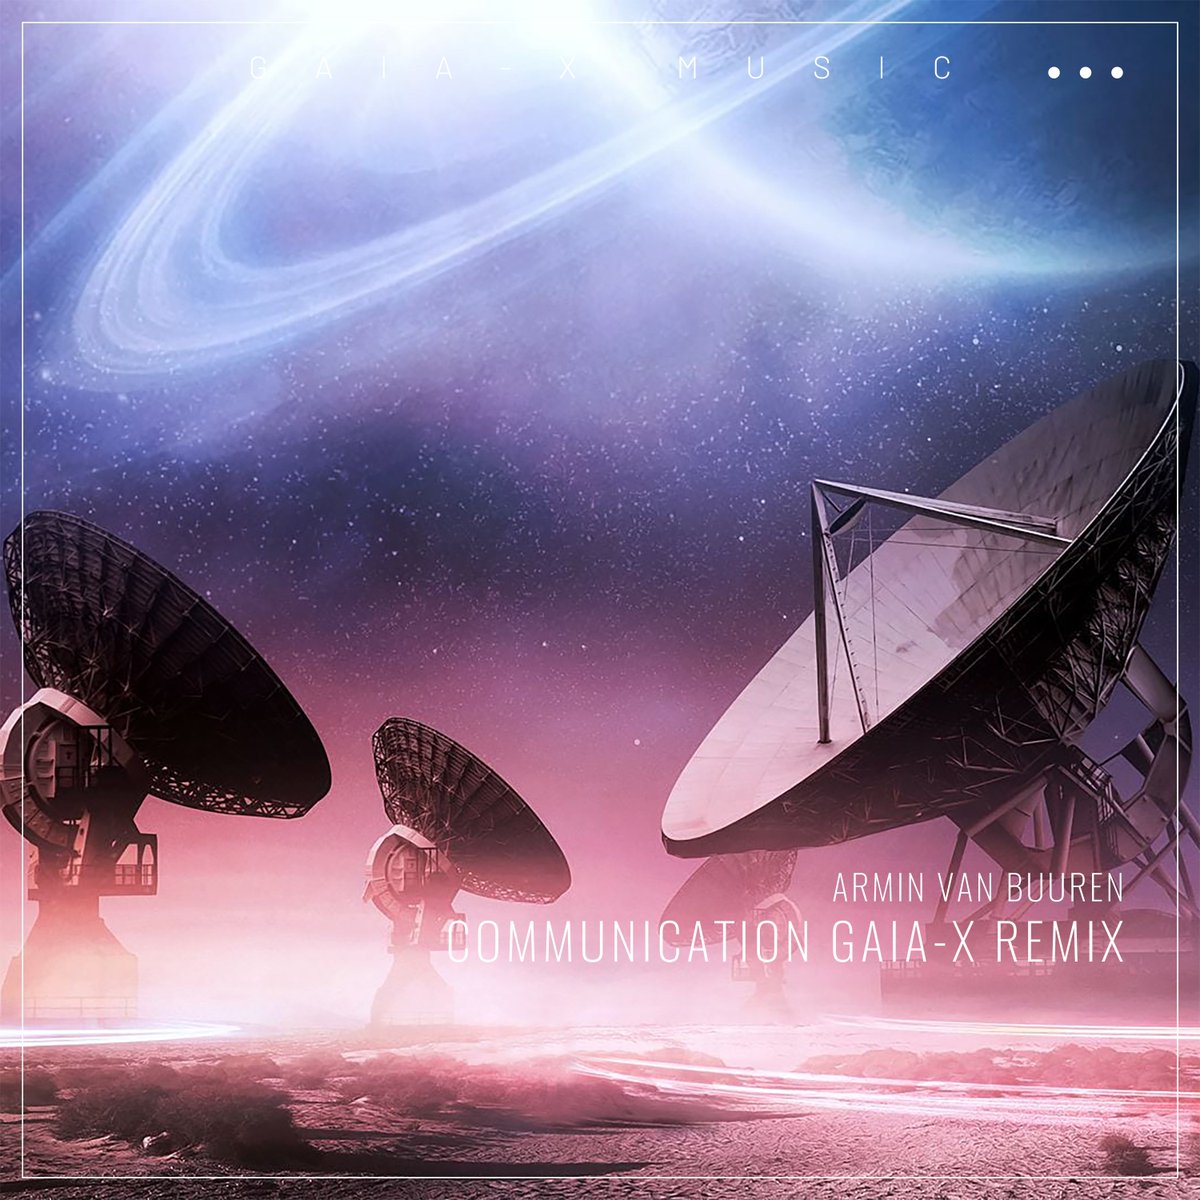 From the producer Gaia-X himself a brand new uplifting trance remix, 'Communication' (Remastered). This is a stupendously big and powerful trance tune by Armin van Buuren.

#trance #tranceclassic #trancefamily